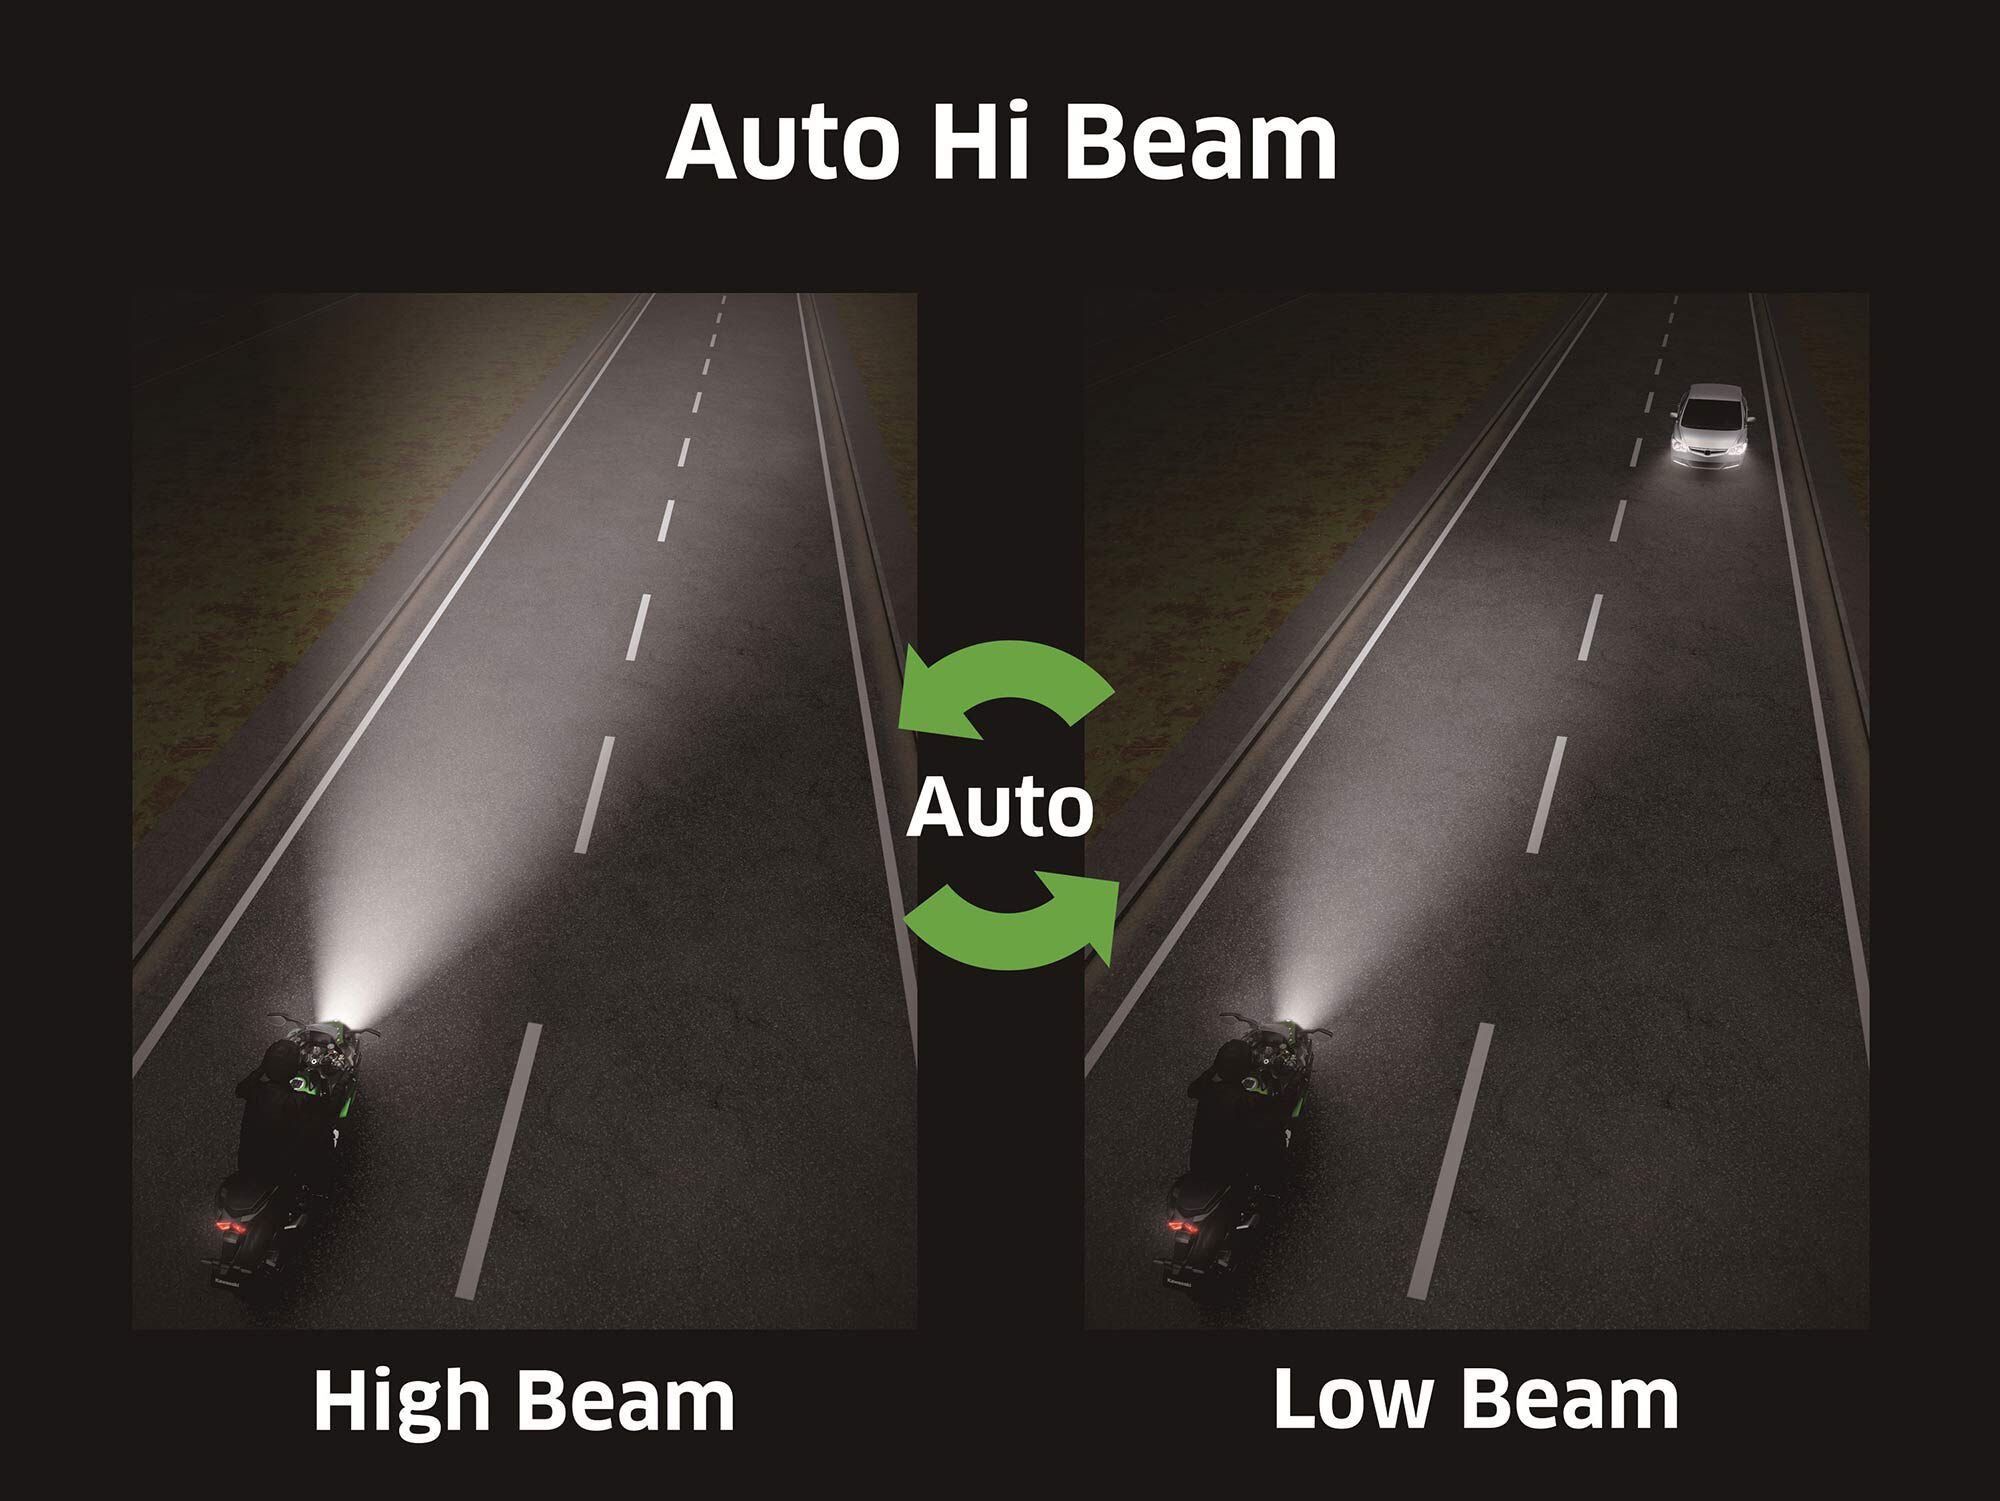 The auto high-beam detects when to turn the high-beam on and off using the bike’s onboard camera sensors.